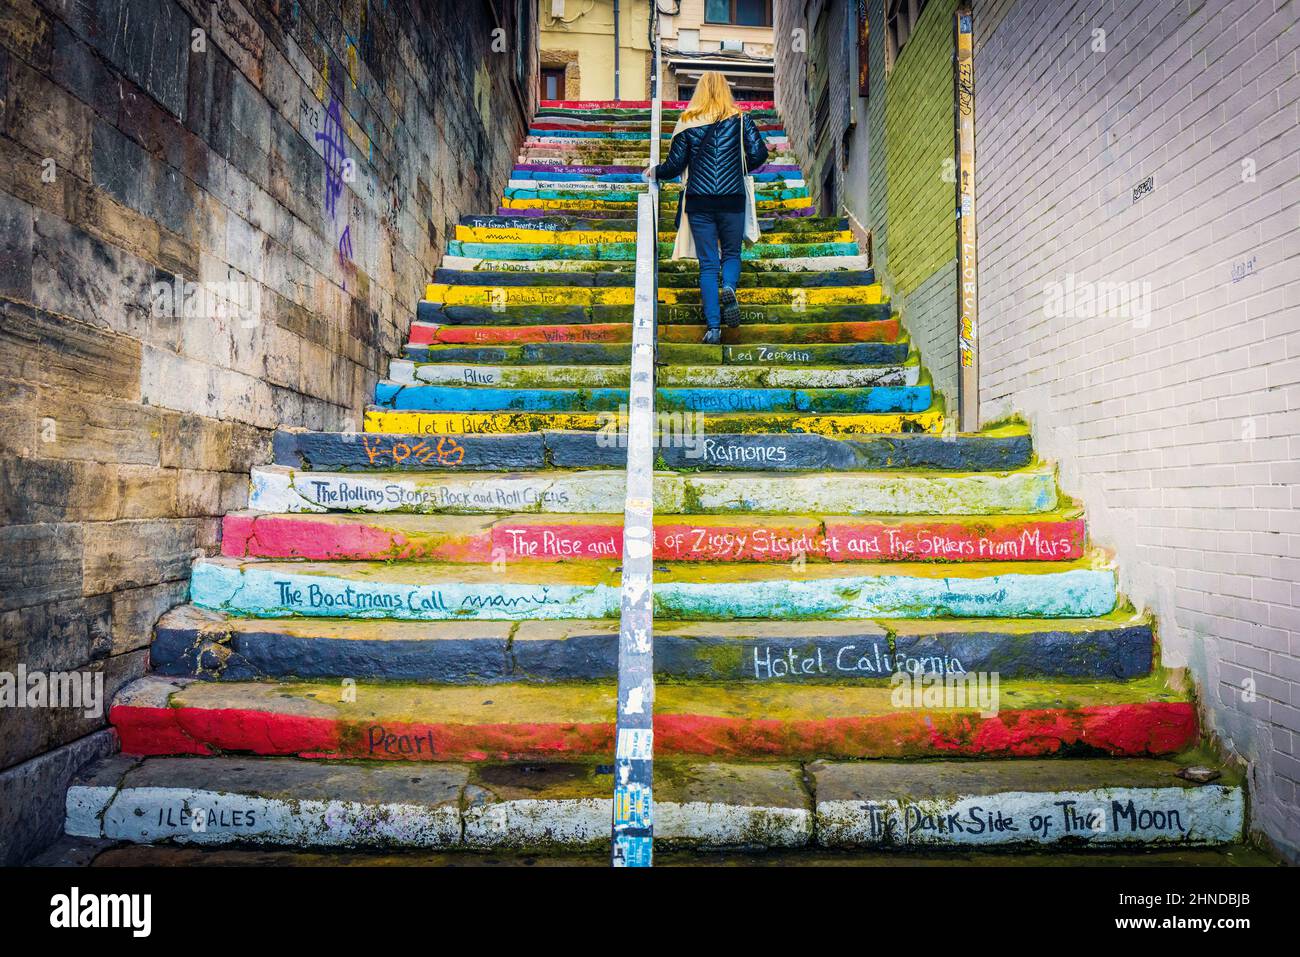 Stairway to Heaven, calle de Claudio Alvargonzález, Gijon, Asturias, Spain.  The stairway celebrating Rock and Roll was created by a street artist kno Stock Photo